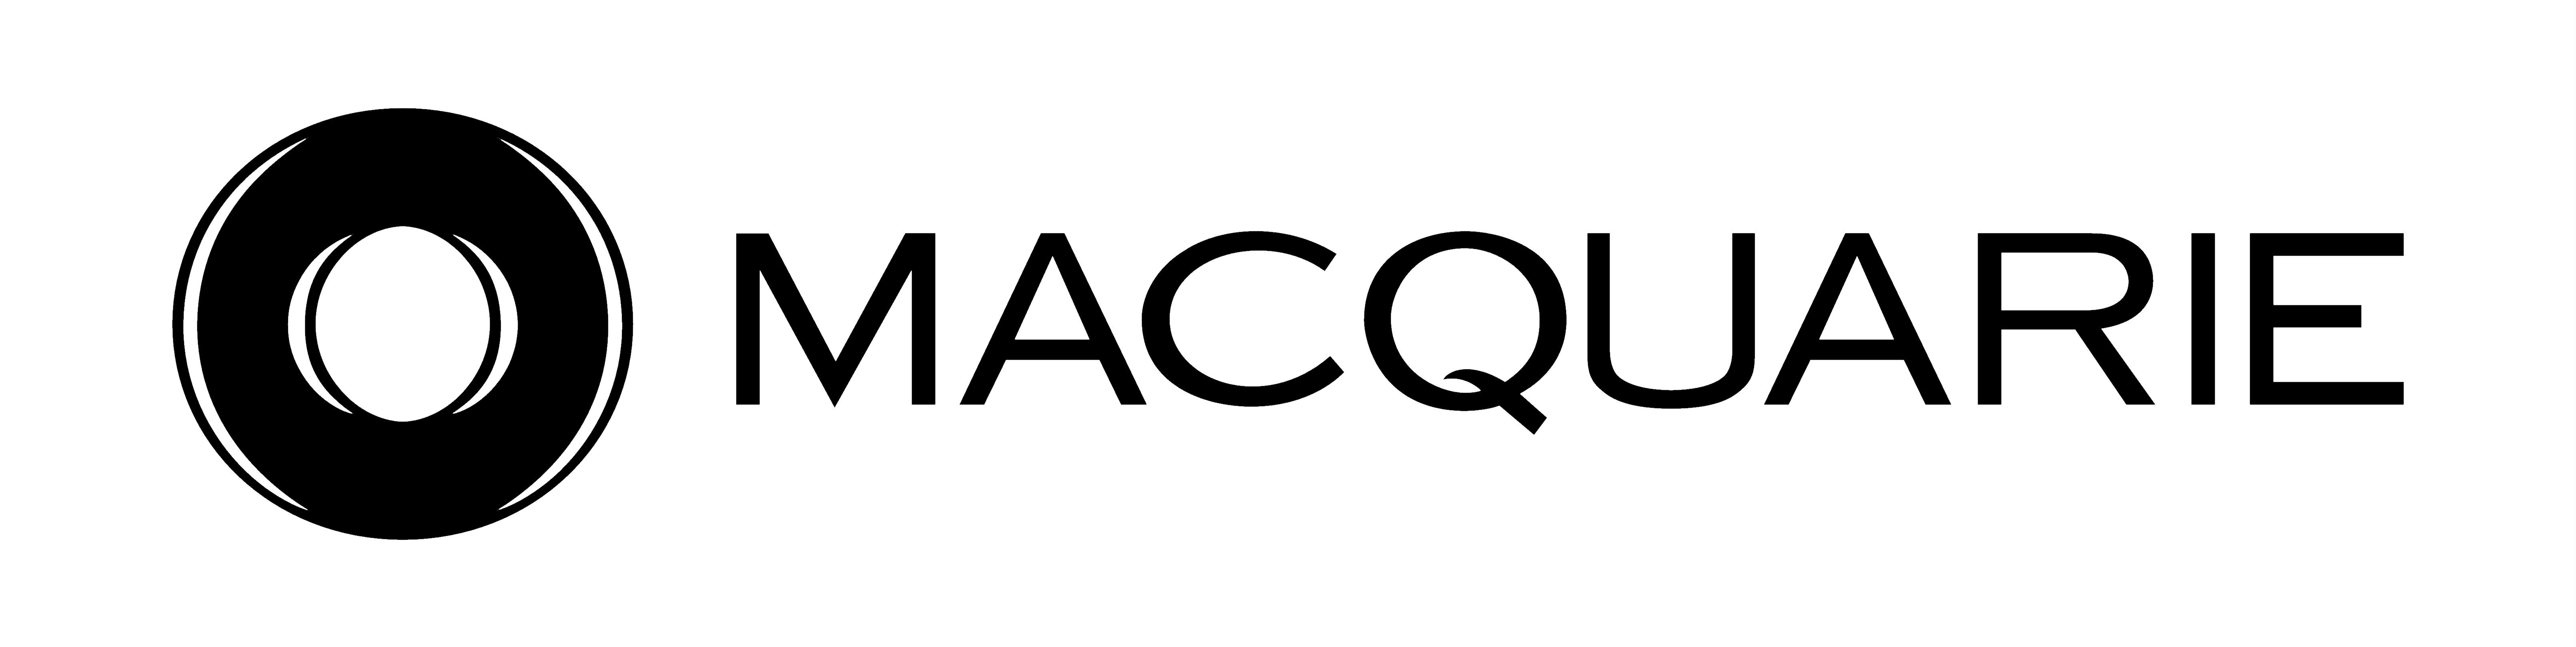 Macquarie Banking and Financial Services Group